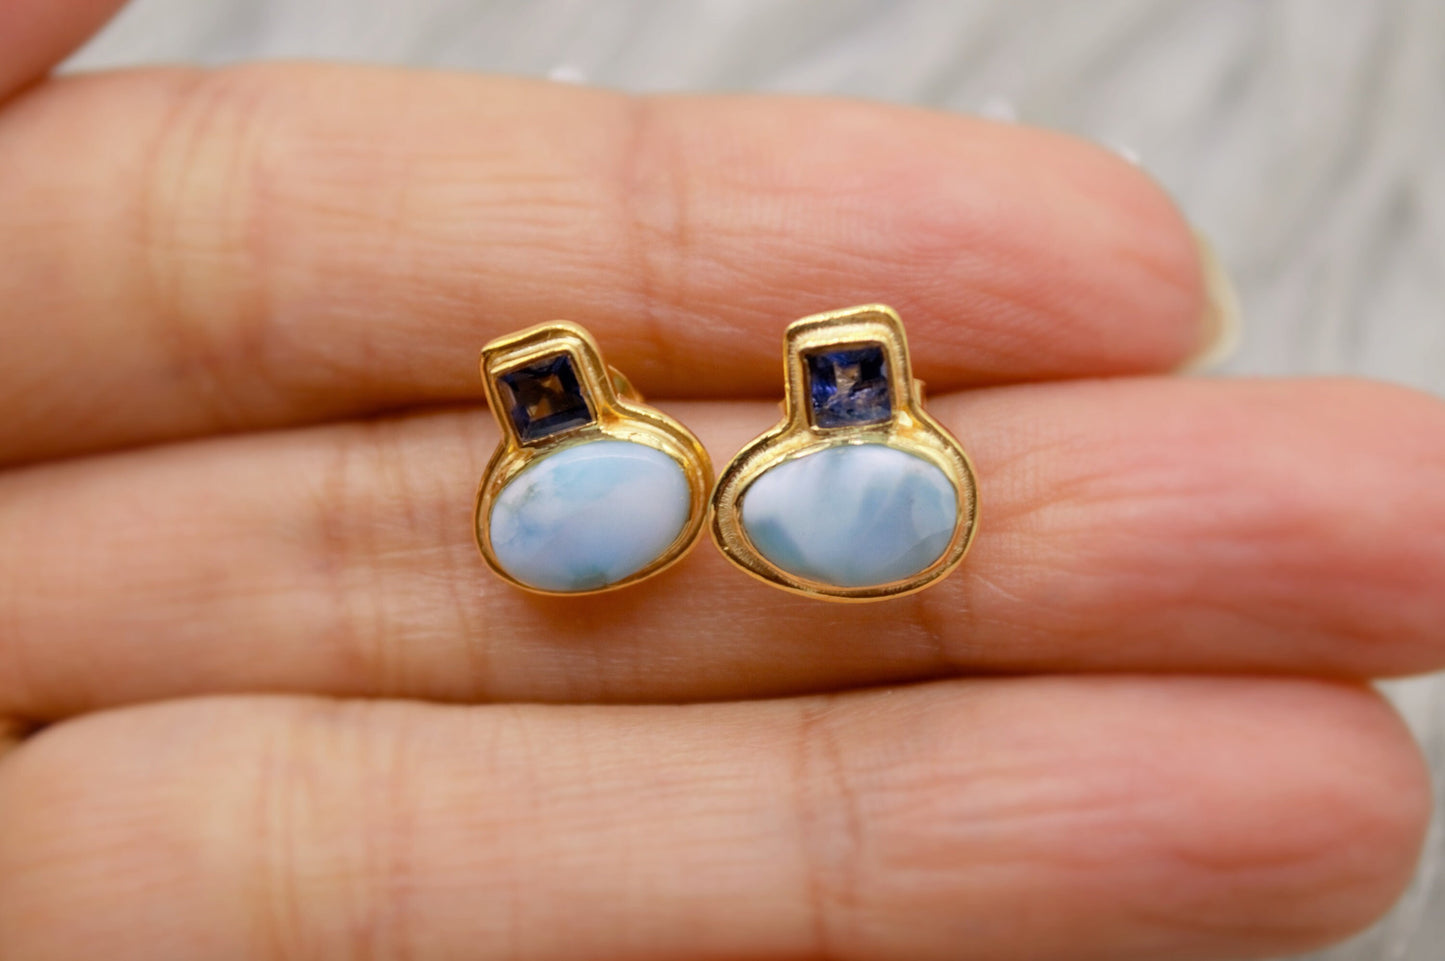 Larimar Earrings, Iolite and Larimar Gemstone, Gold Plated Sterling silver, Dainty Studs Earrings, Handmade Birthday Gift For Her